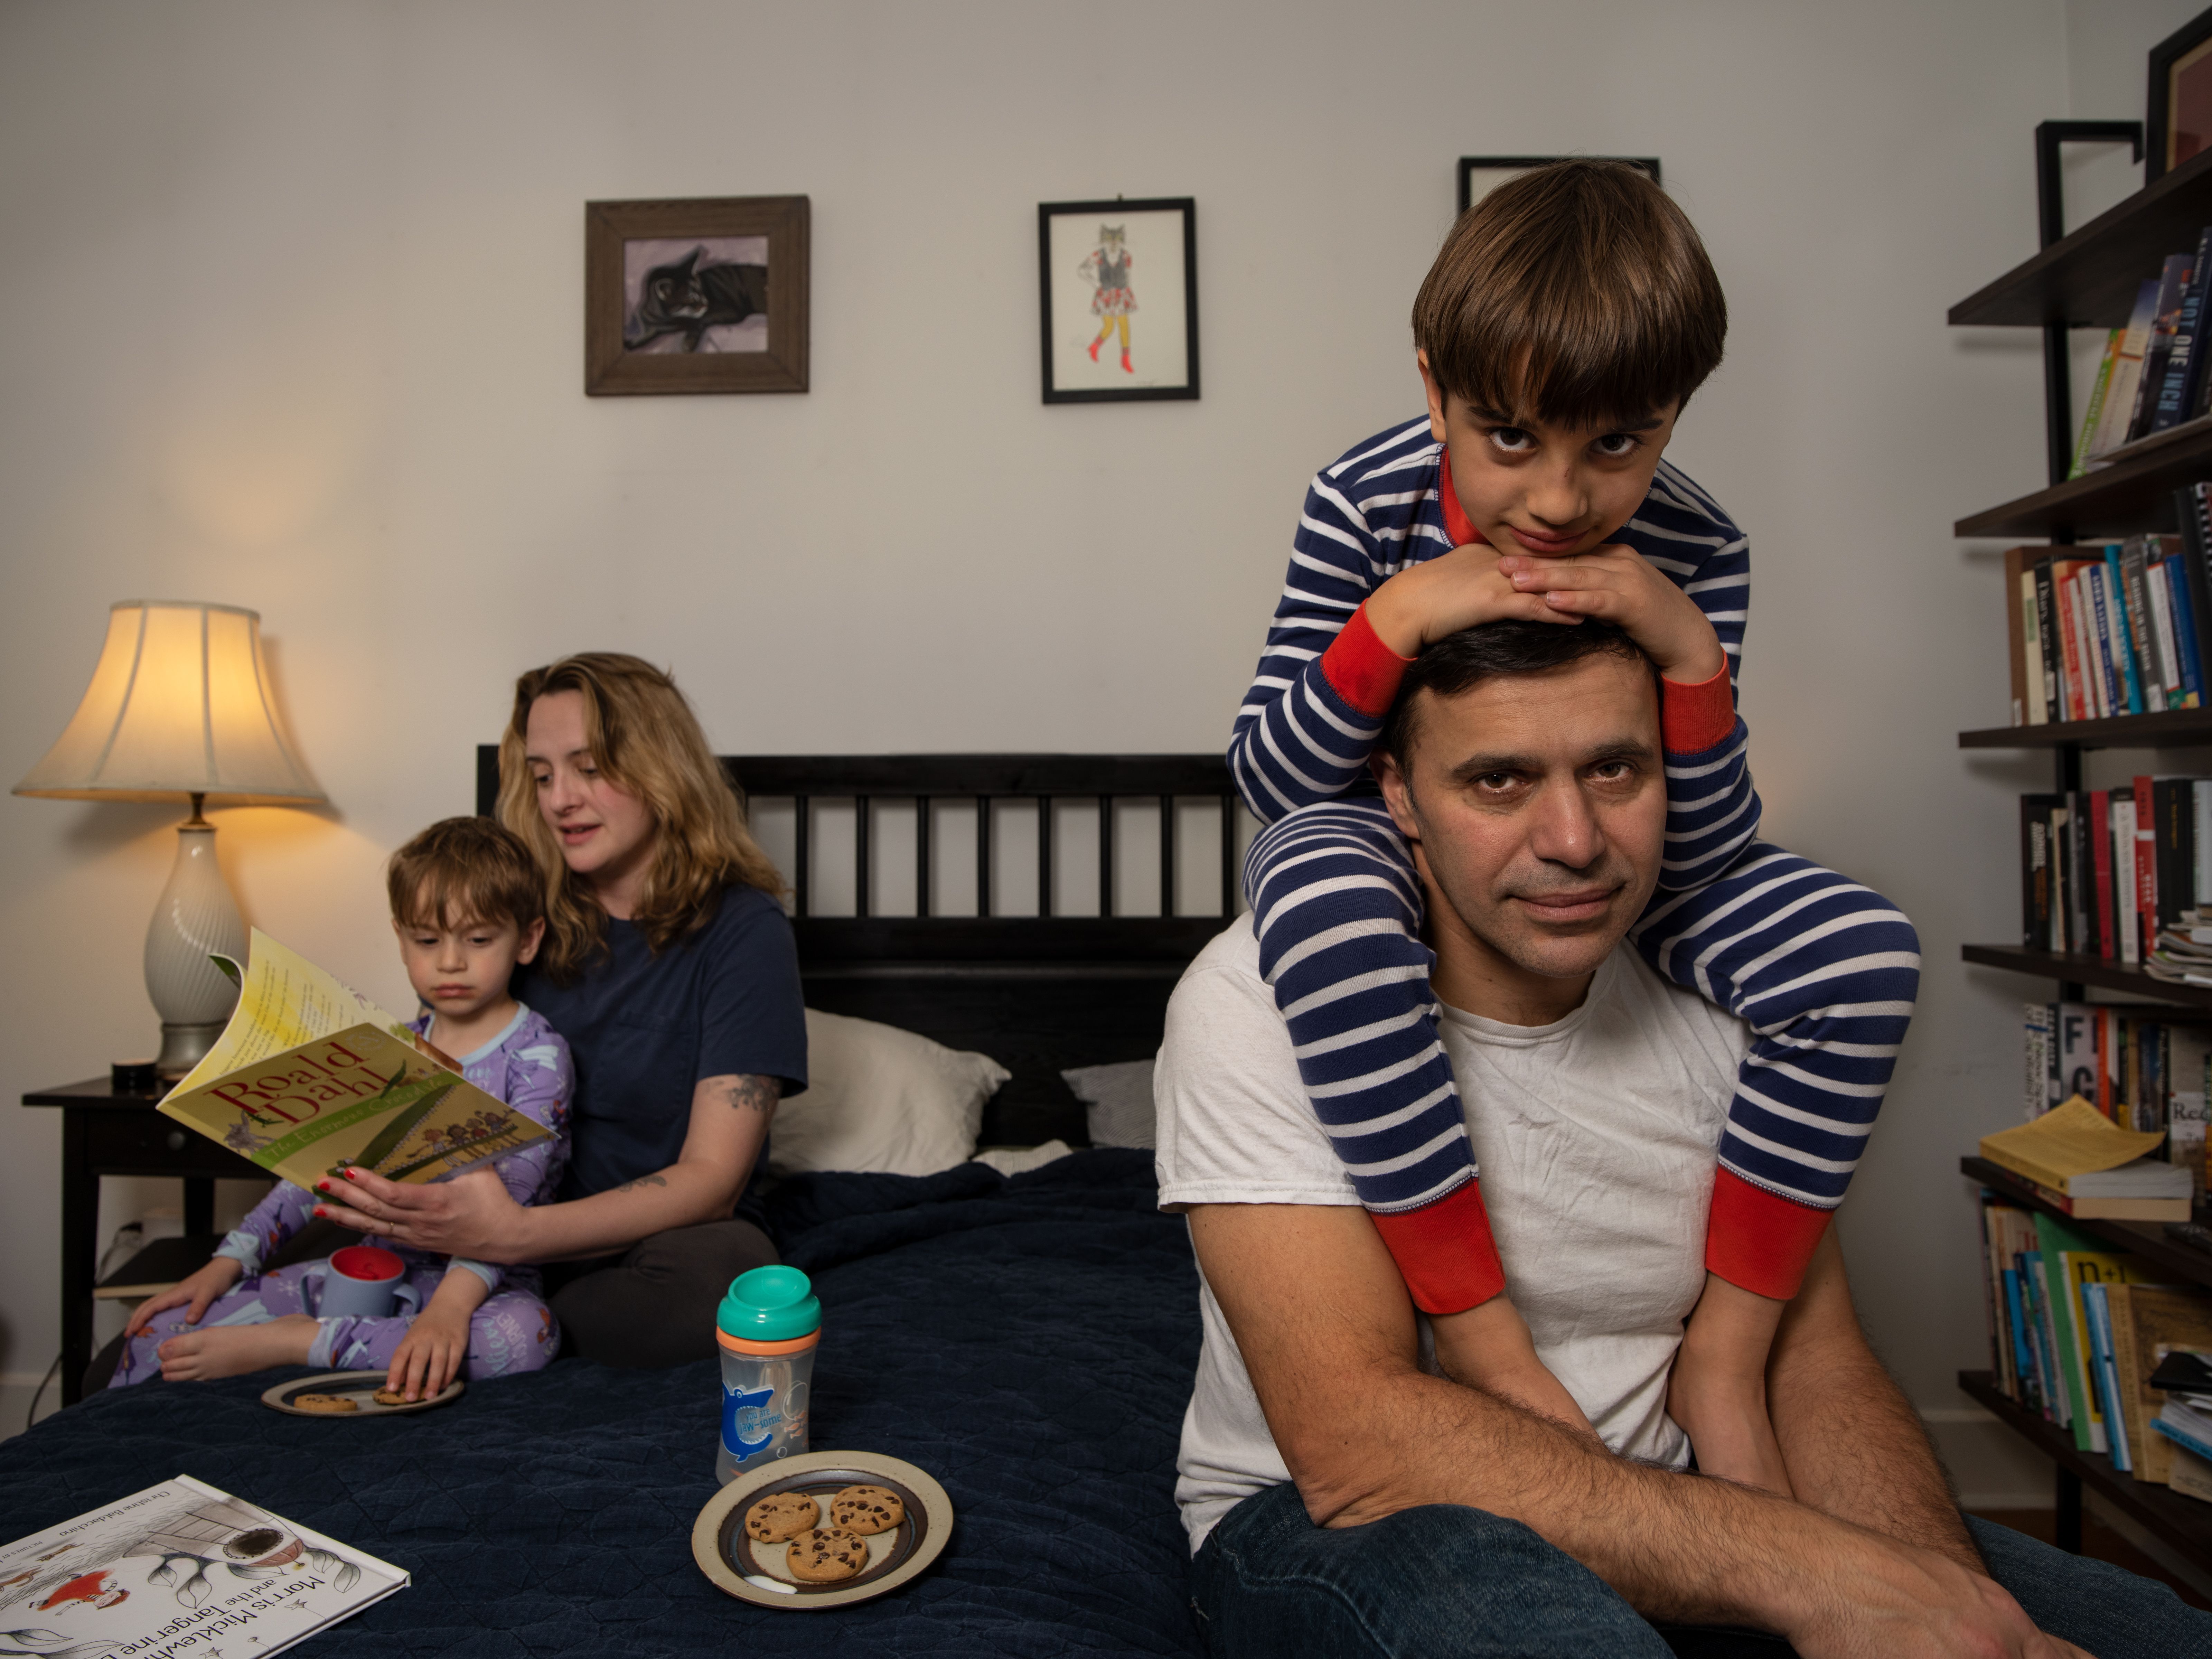 Keith Gessen and Emily Gould on Writing Books and Children pic photo